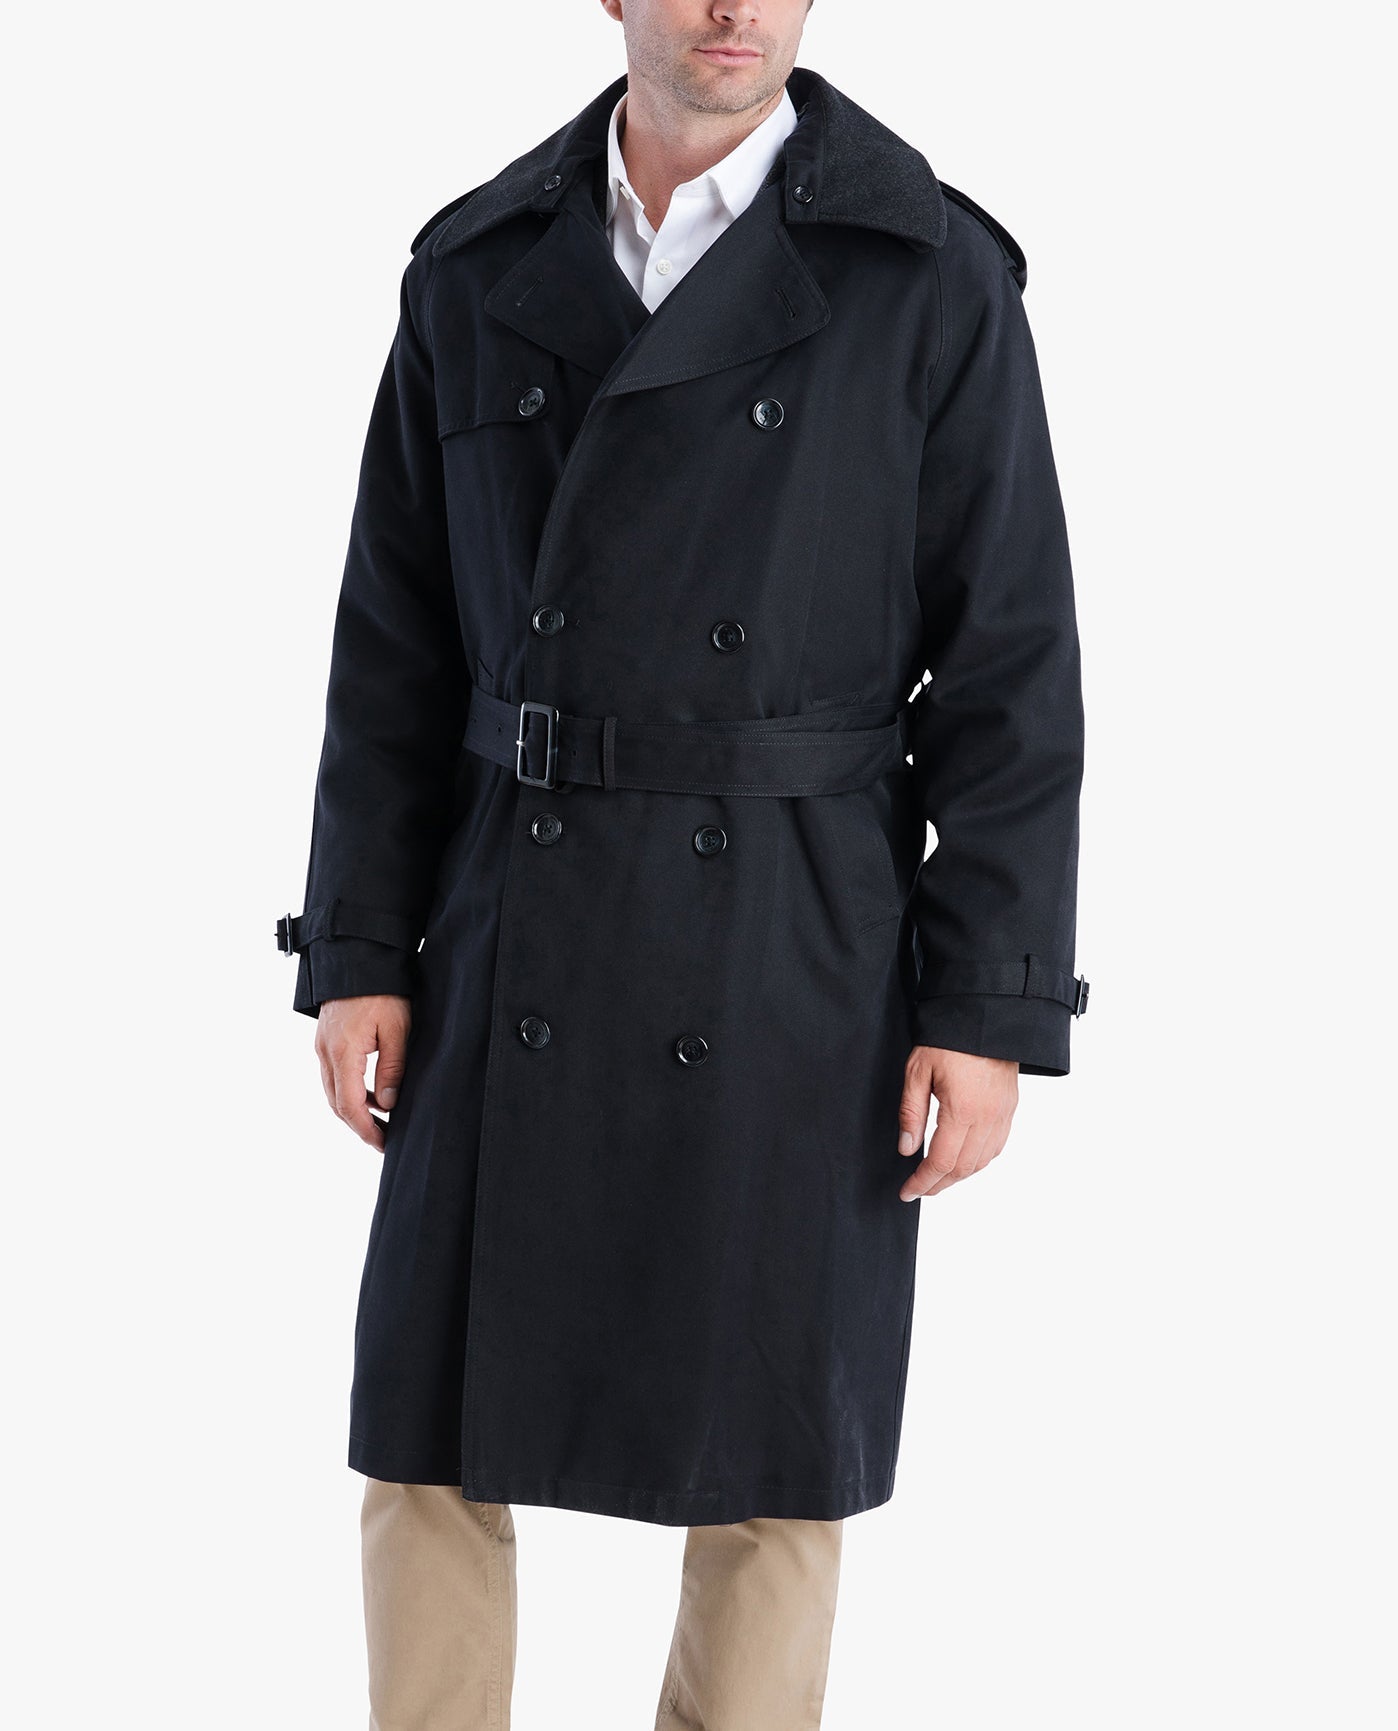 ANOTHER VIEW OF CLASSIC DOUBLE BREASTED TRENCH COAT | BLACK